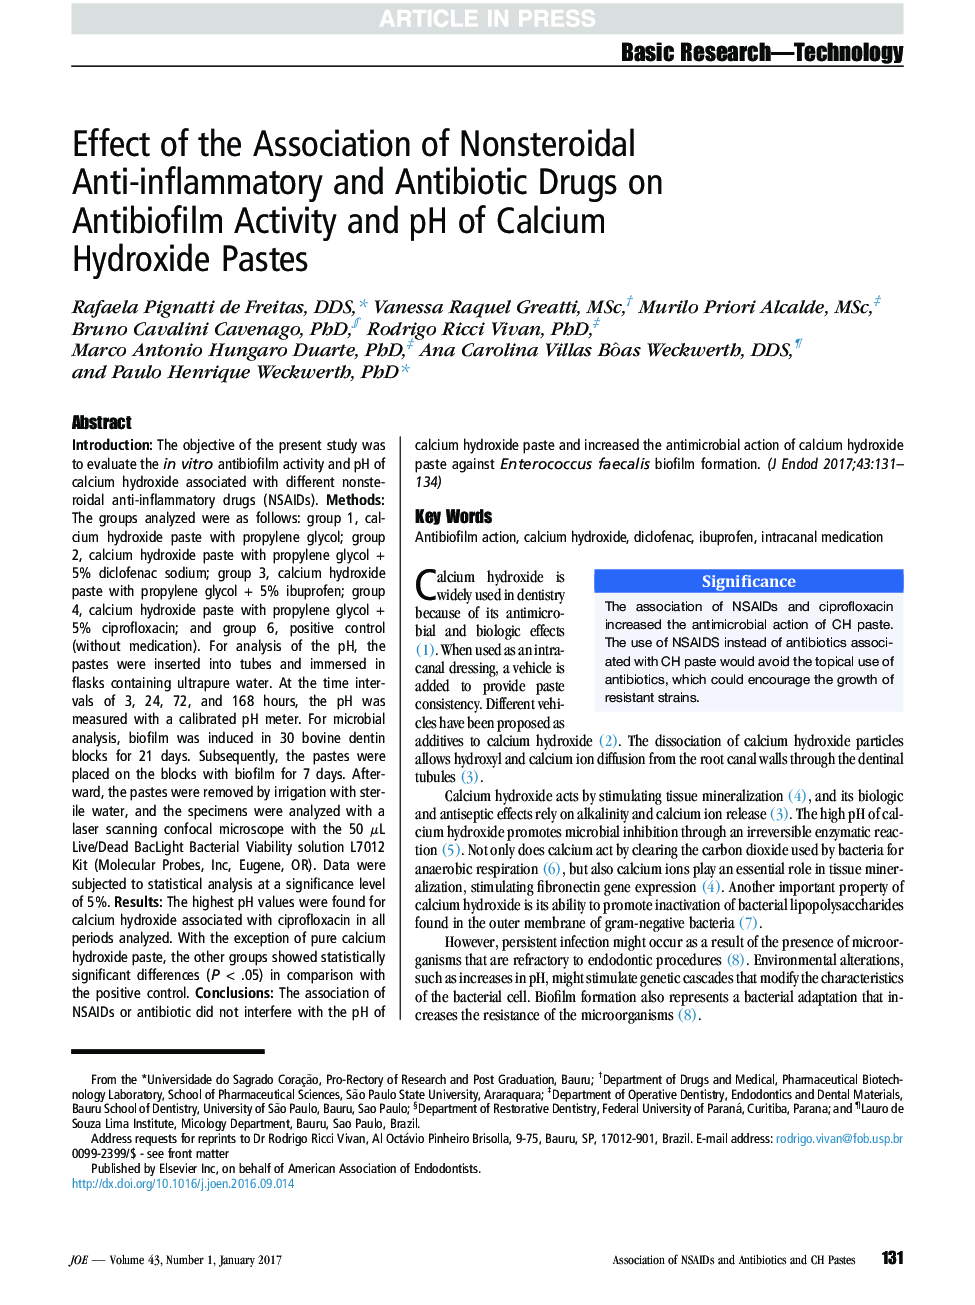 Effect of the Association of Nonsteroidal Anti-inflammatory and Antibiotic Drugs on Antibiofilm Activity and pH of Calcium Hydroxide Pastes